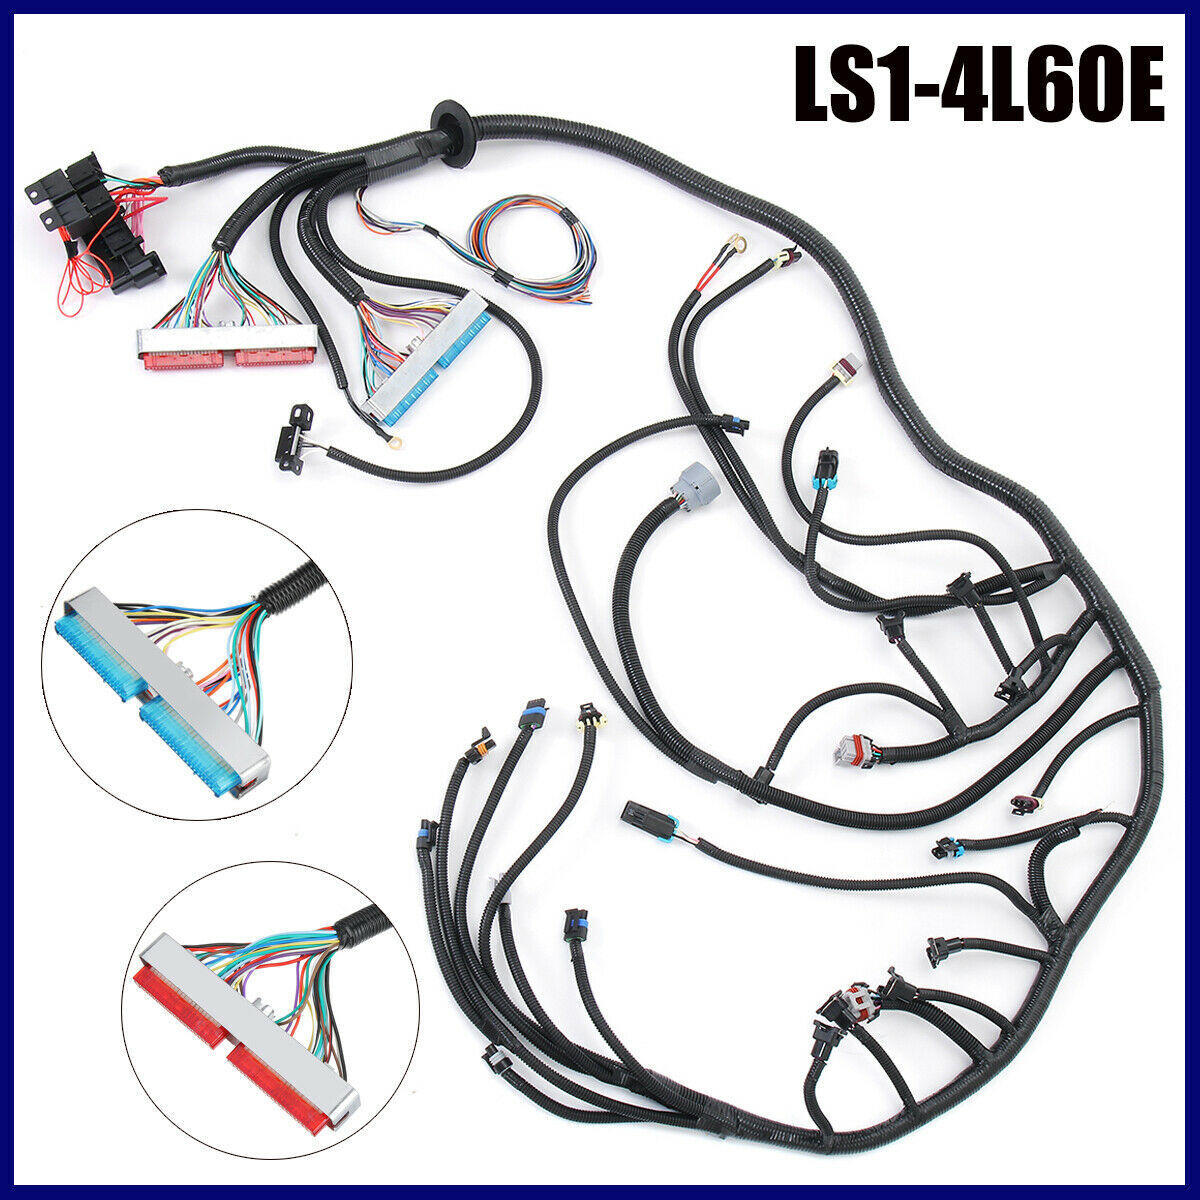 LS1-4L60E Wiring Harness Stand Alone For LS SWAPS DBC 4.8 5.3 6.0 97-06 98 99 00